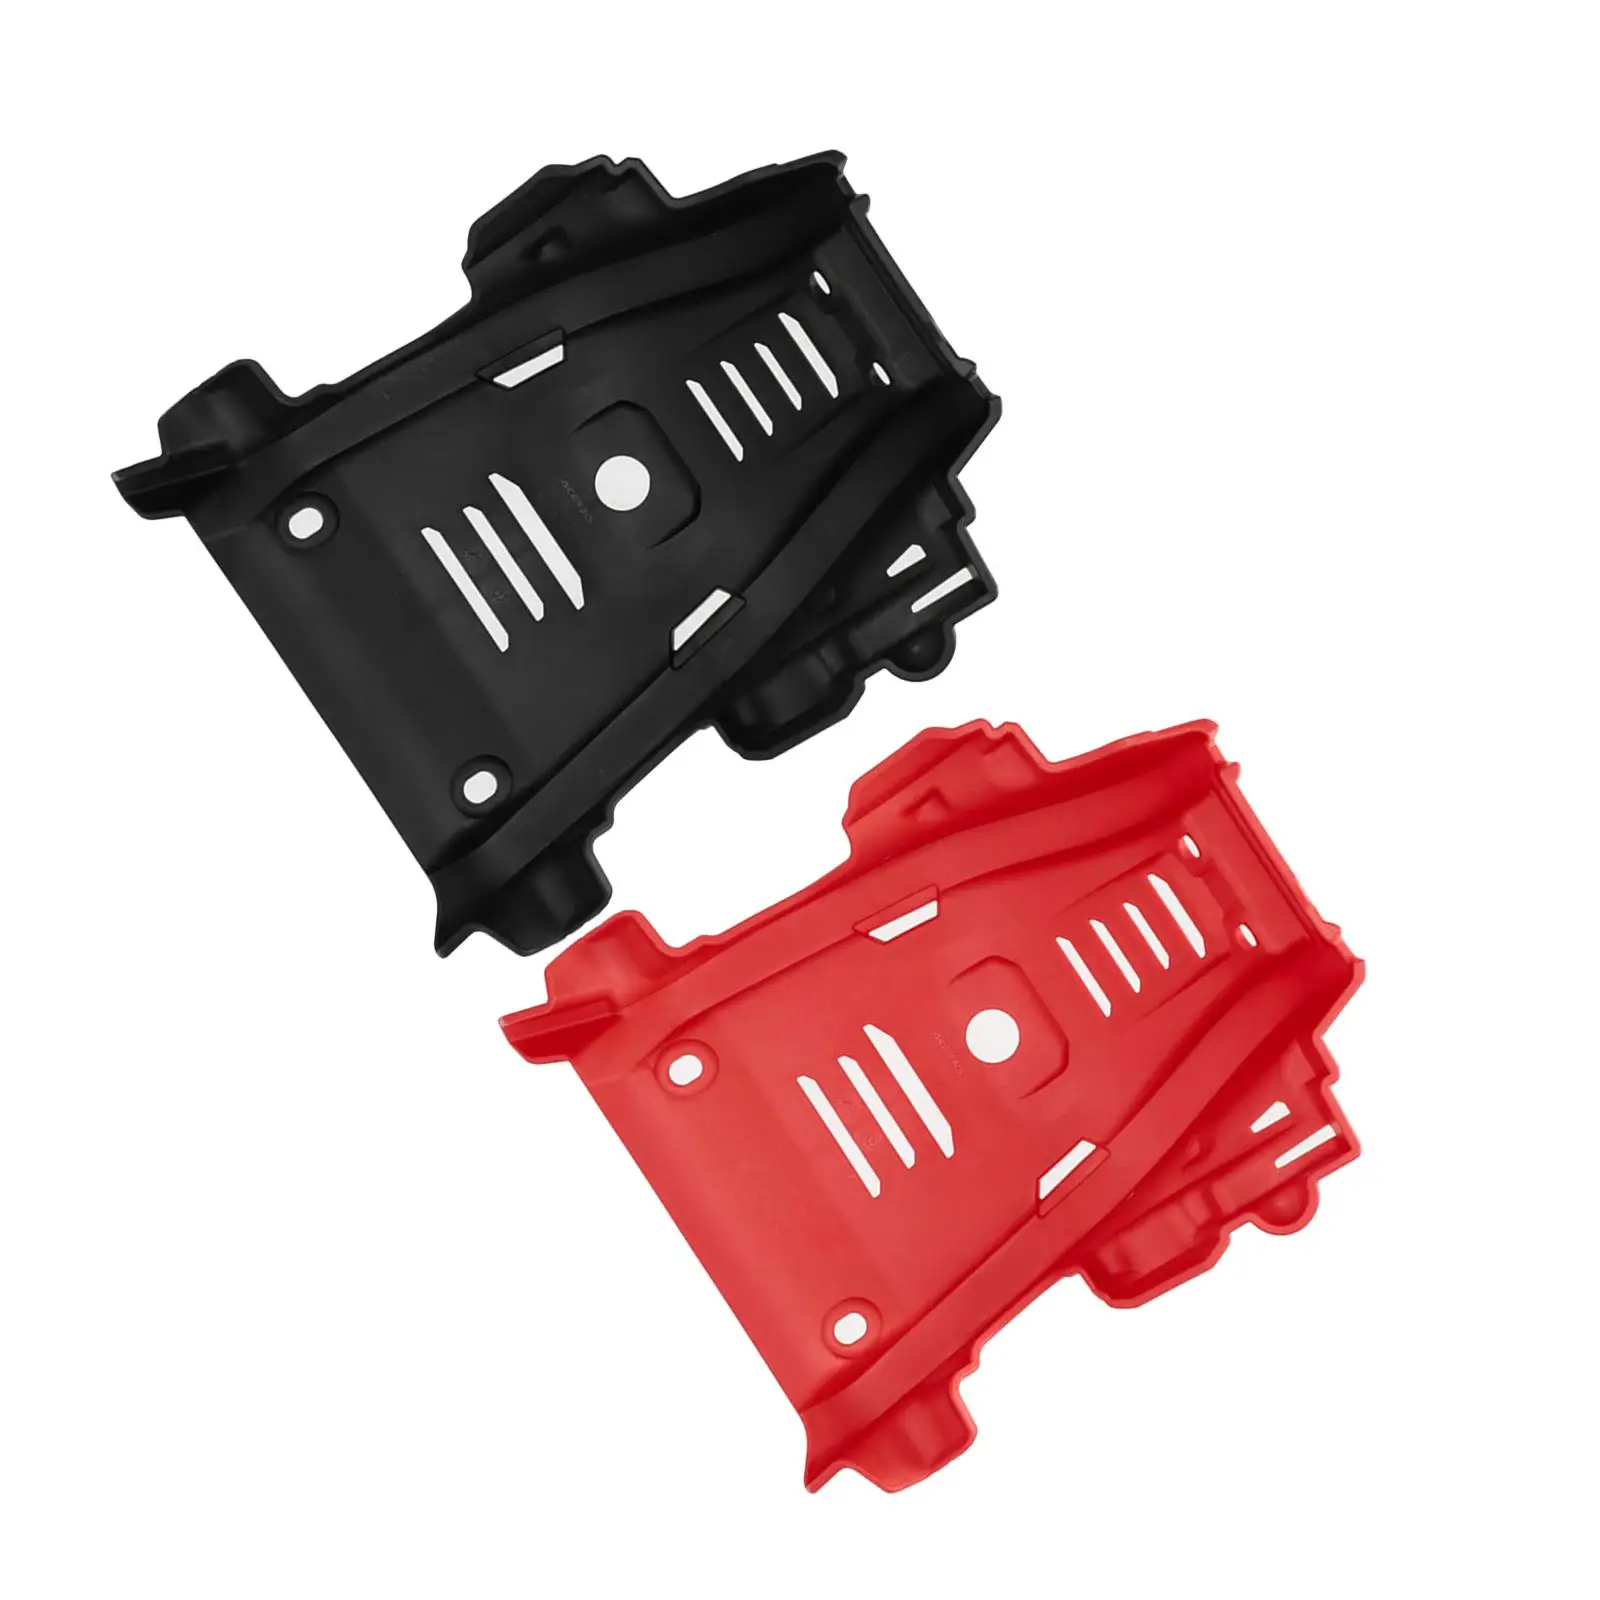 Engine Chassis Guard Plate Protection Cover for Crf300L Spare Parts